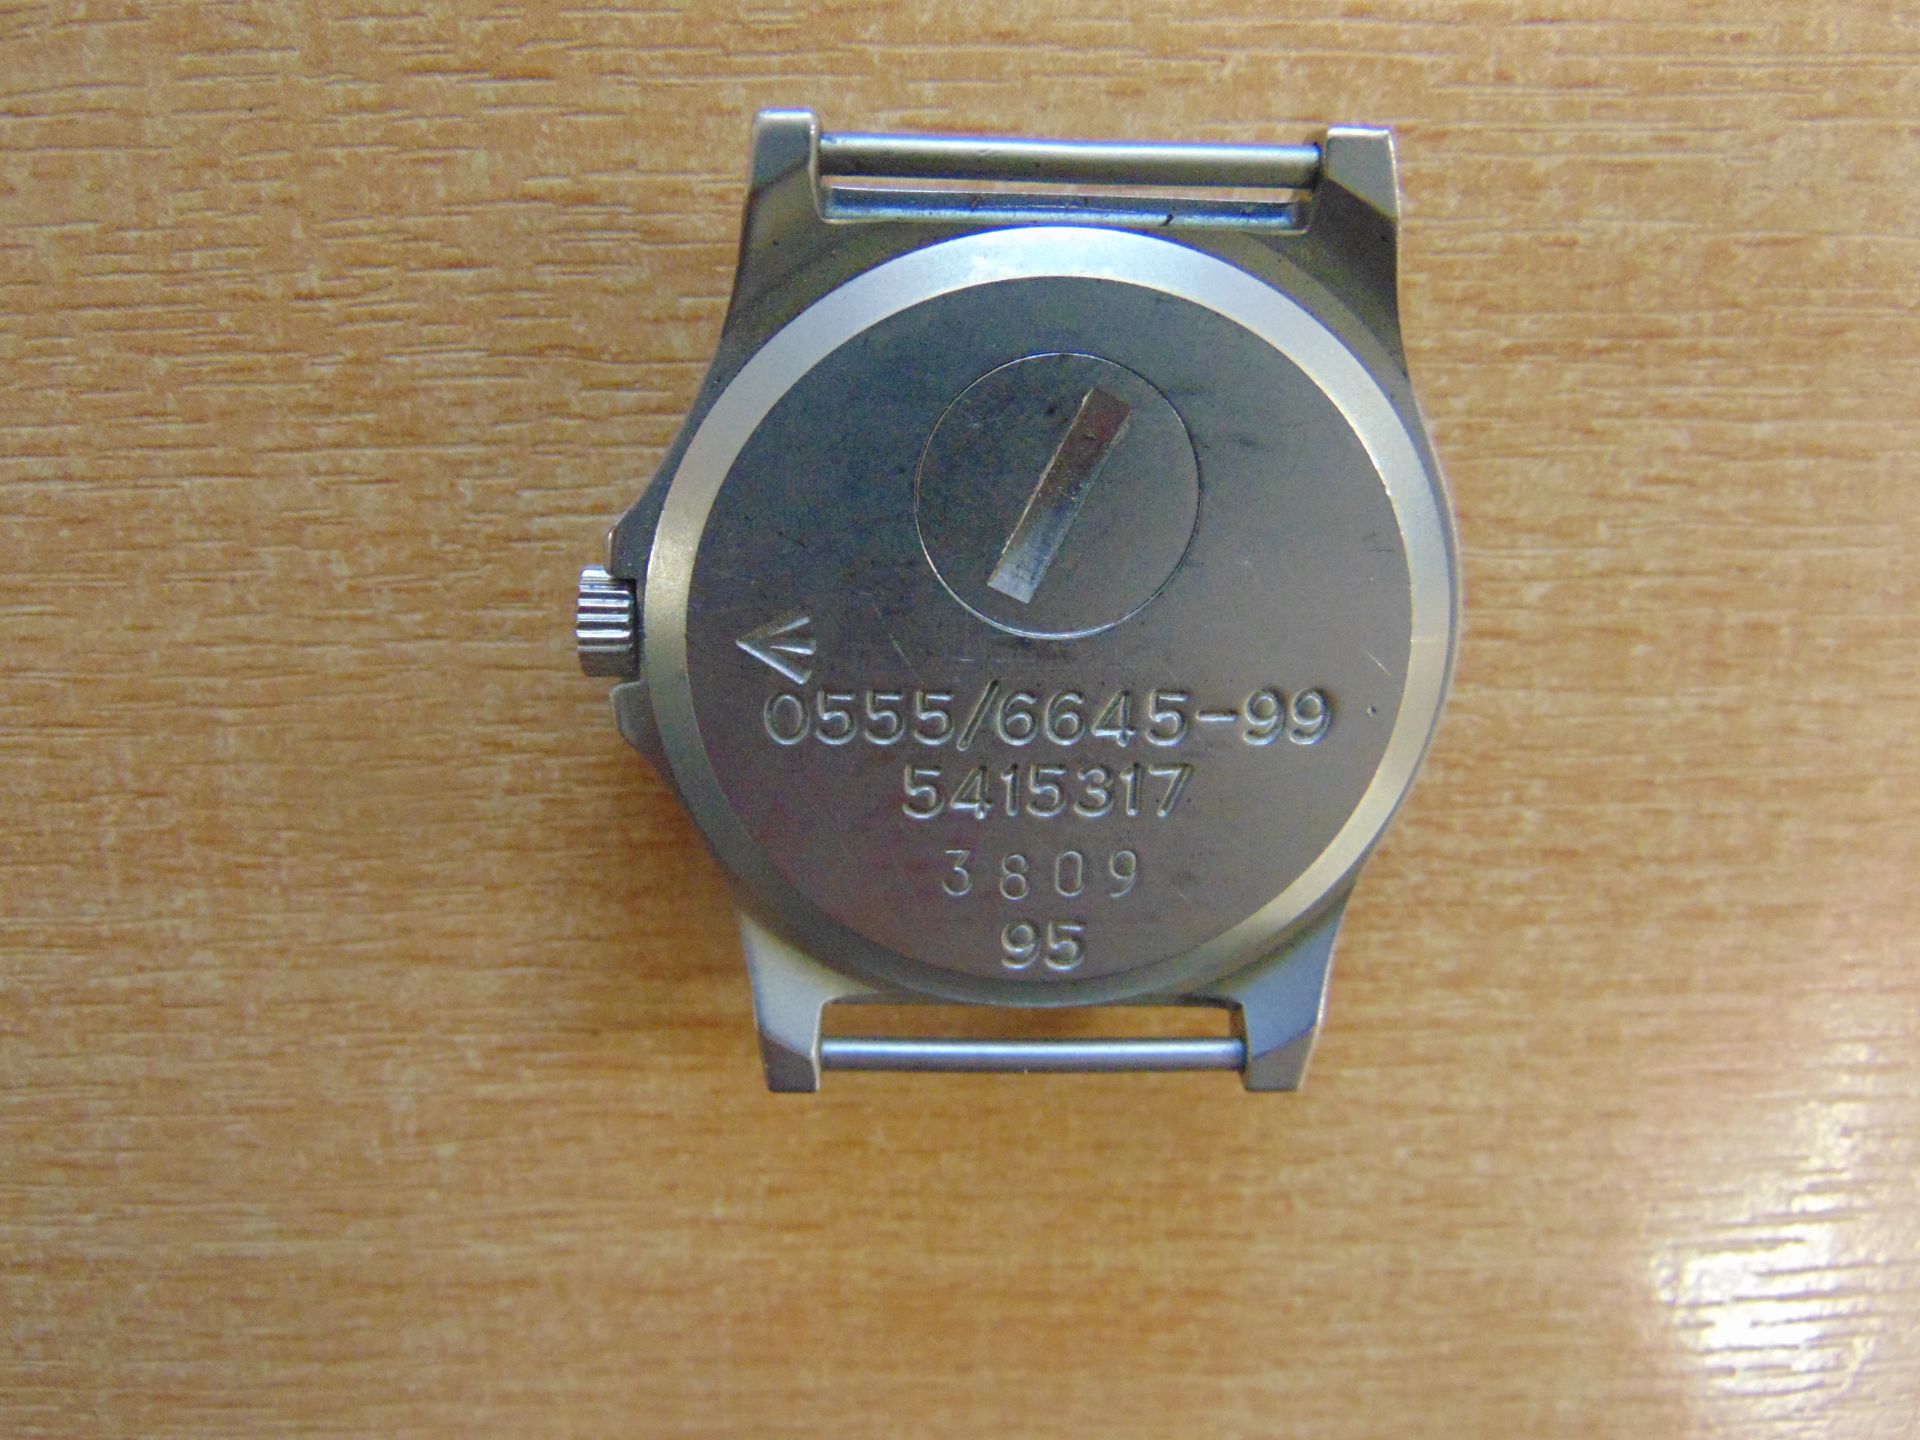 V. RARE C.W.C.0555 RM/NAVY ISSUE SERVICE WATCH DATED 1995 - Image 6 of 7